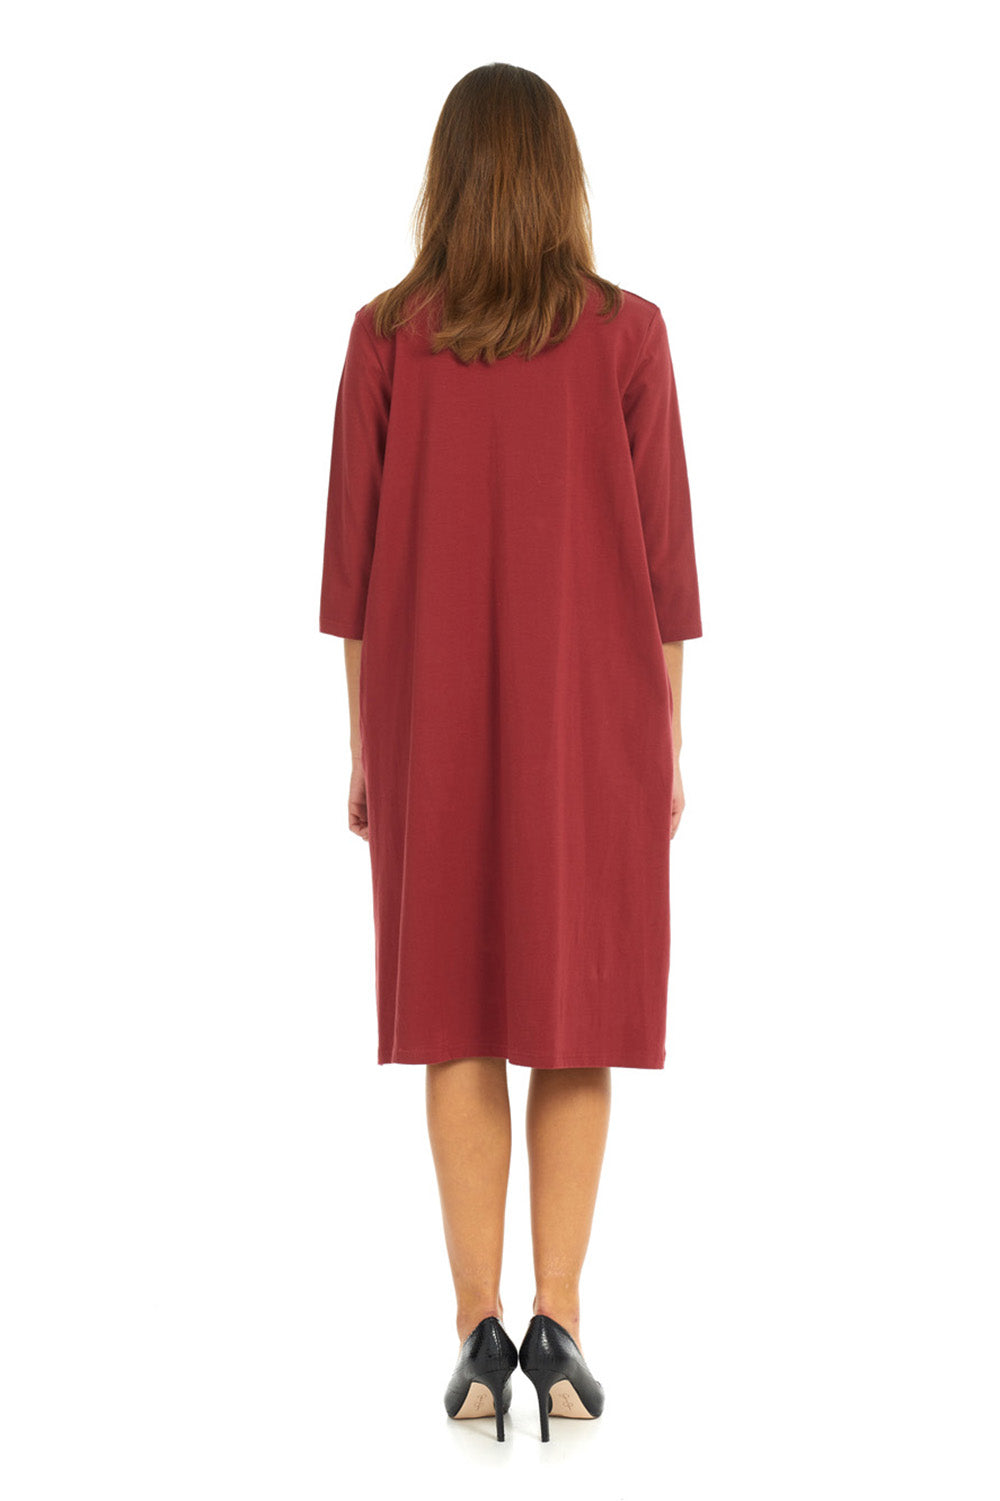 Soft and comfy cotton burgunday t-shirt dress with pockets. modest 3/4 sleeves and knee length